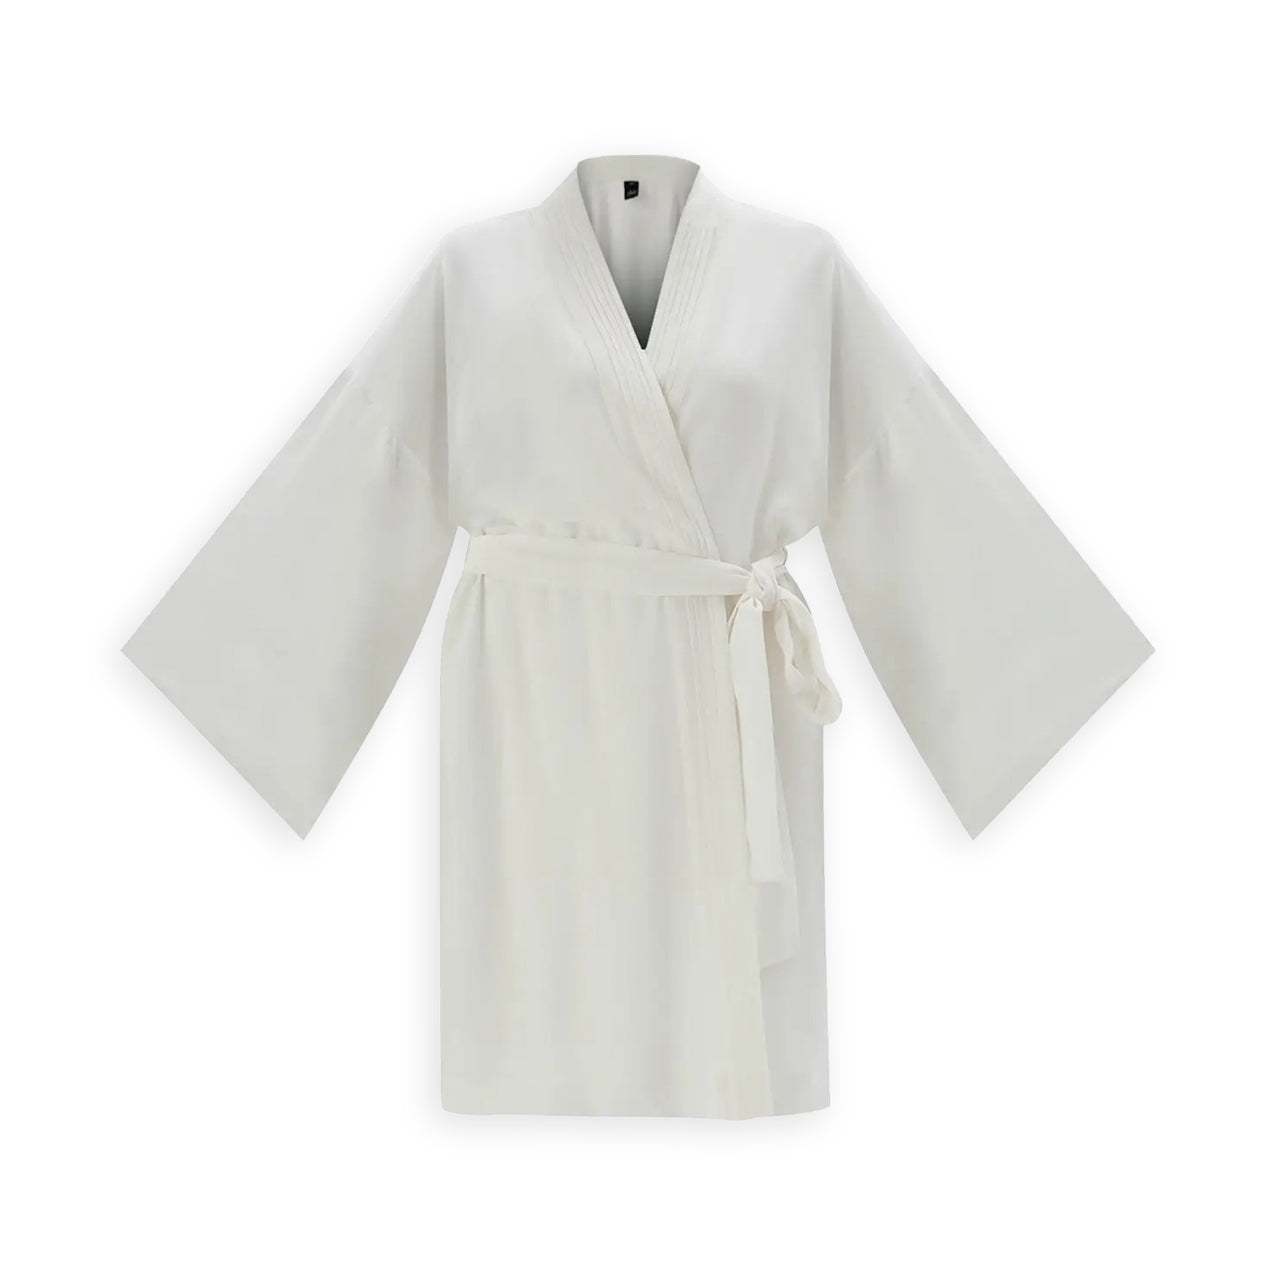 Else Lingerie Diana Robe | Uncrate Supply